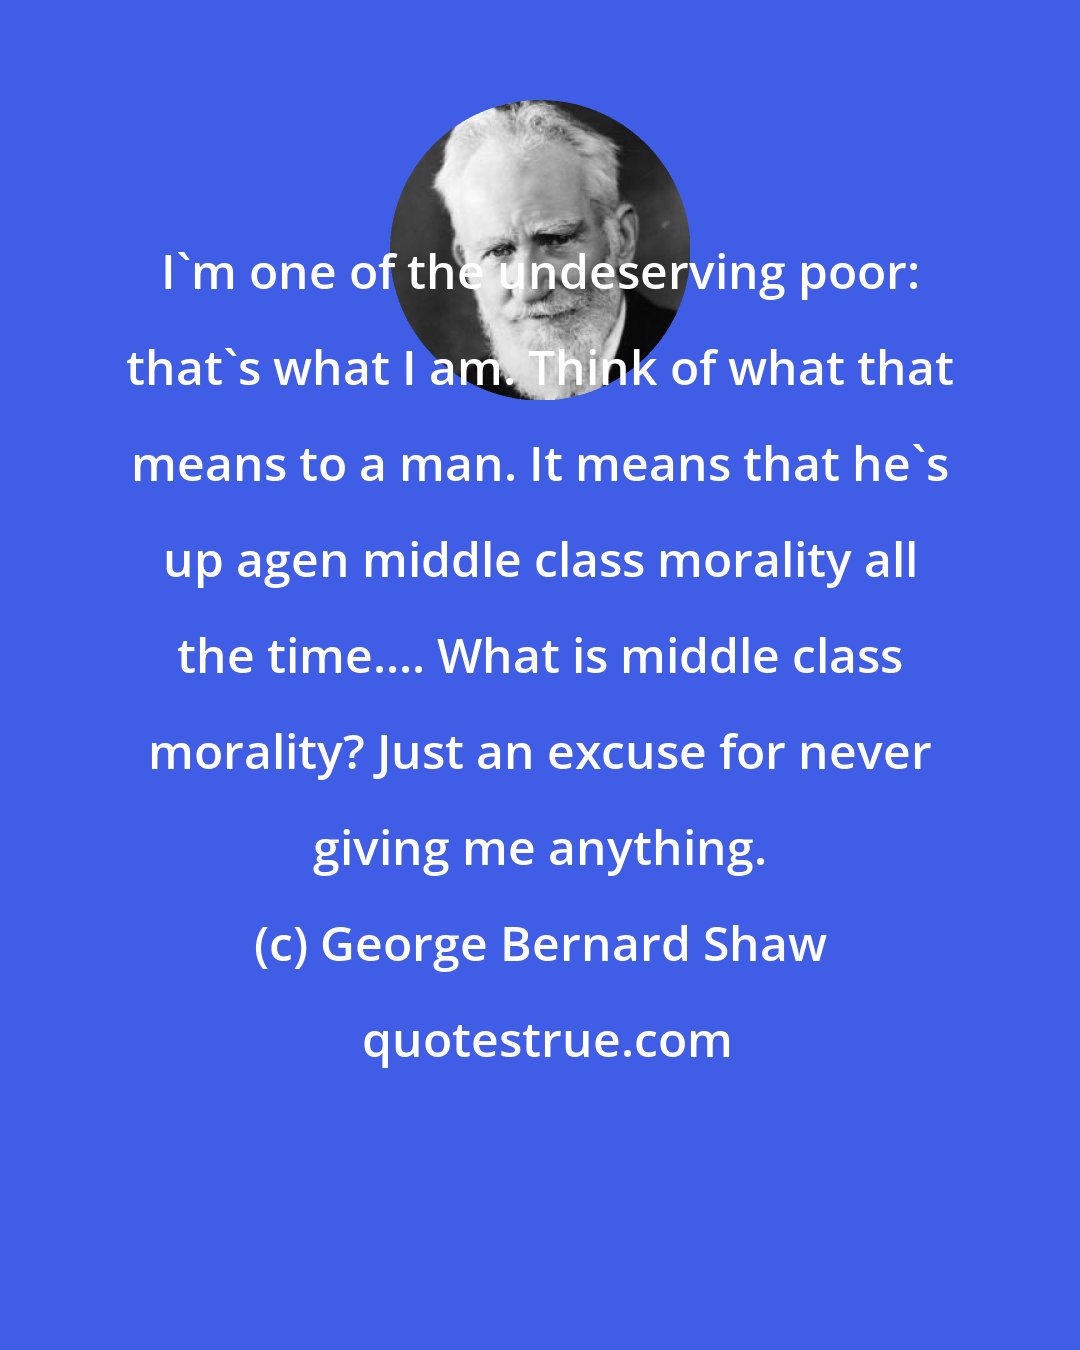 George Bernard Shaw: I'm one of the undeserving poor: that's what I am. Think of what that means to a man. It means that he's up agen middle class morality all the time.... What is middle class morality? Just an excuse for never giving me anything.